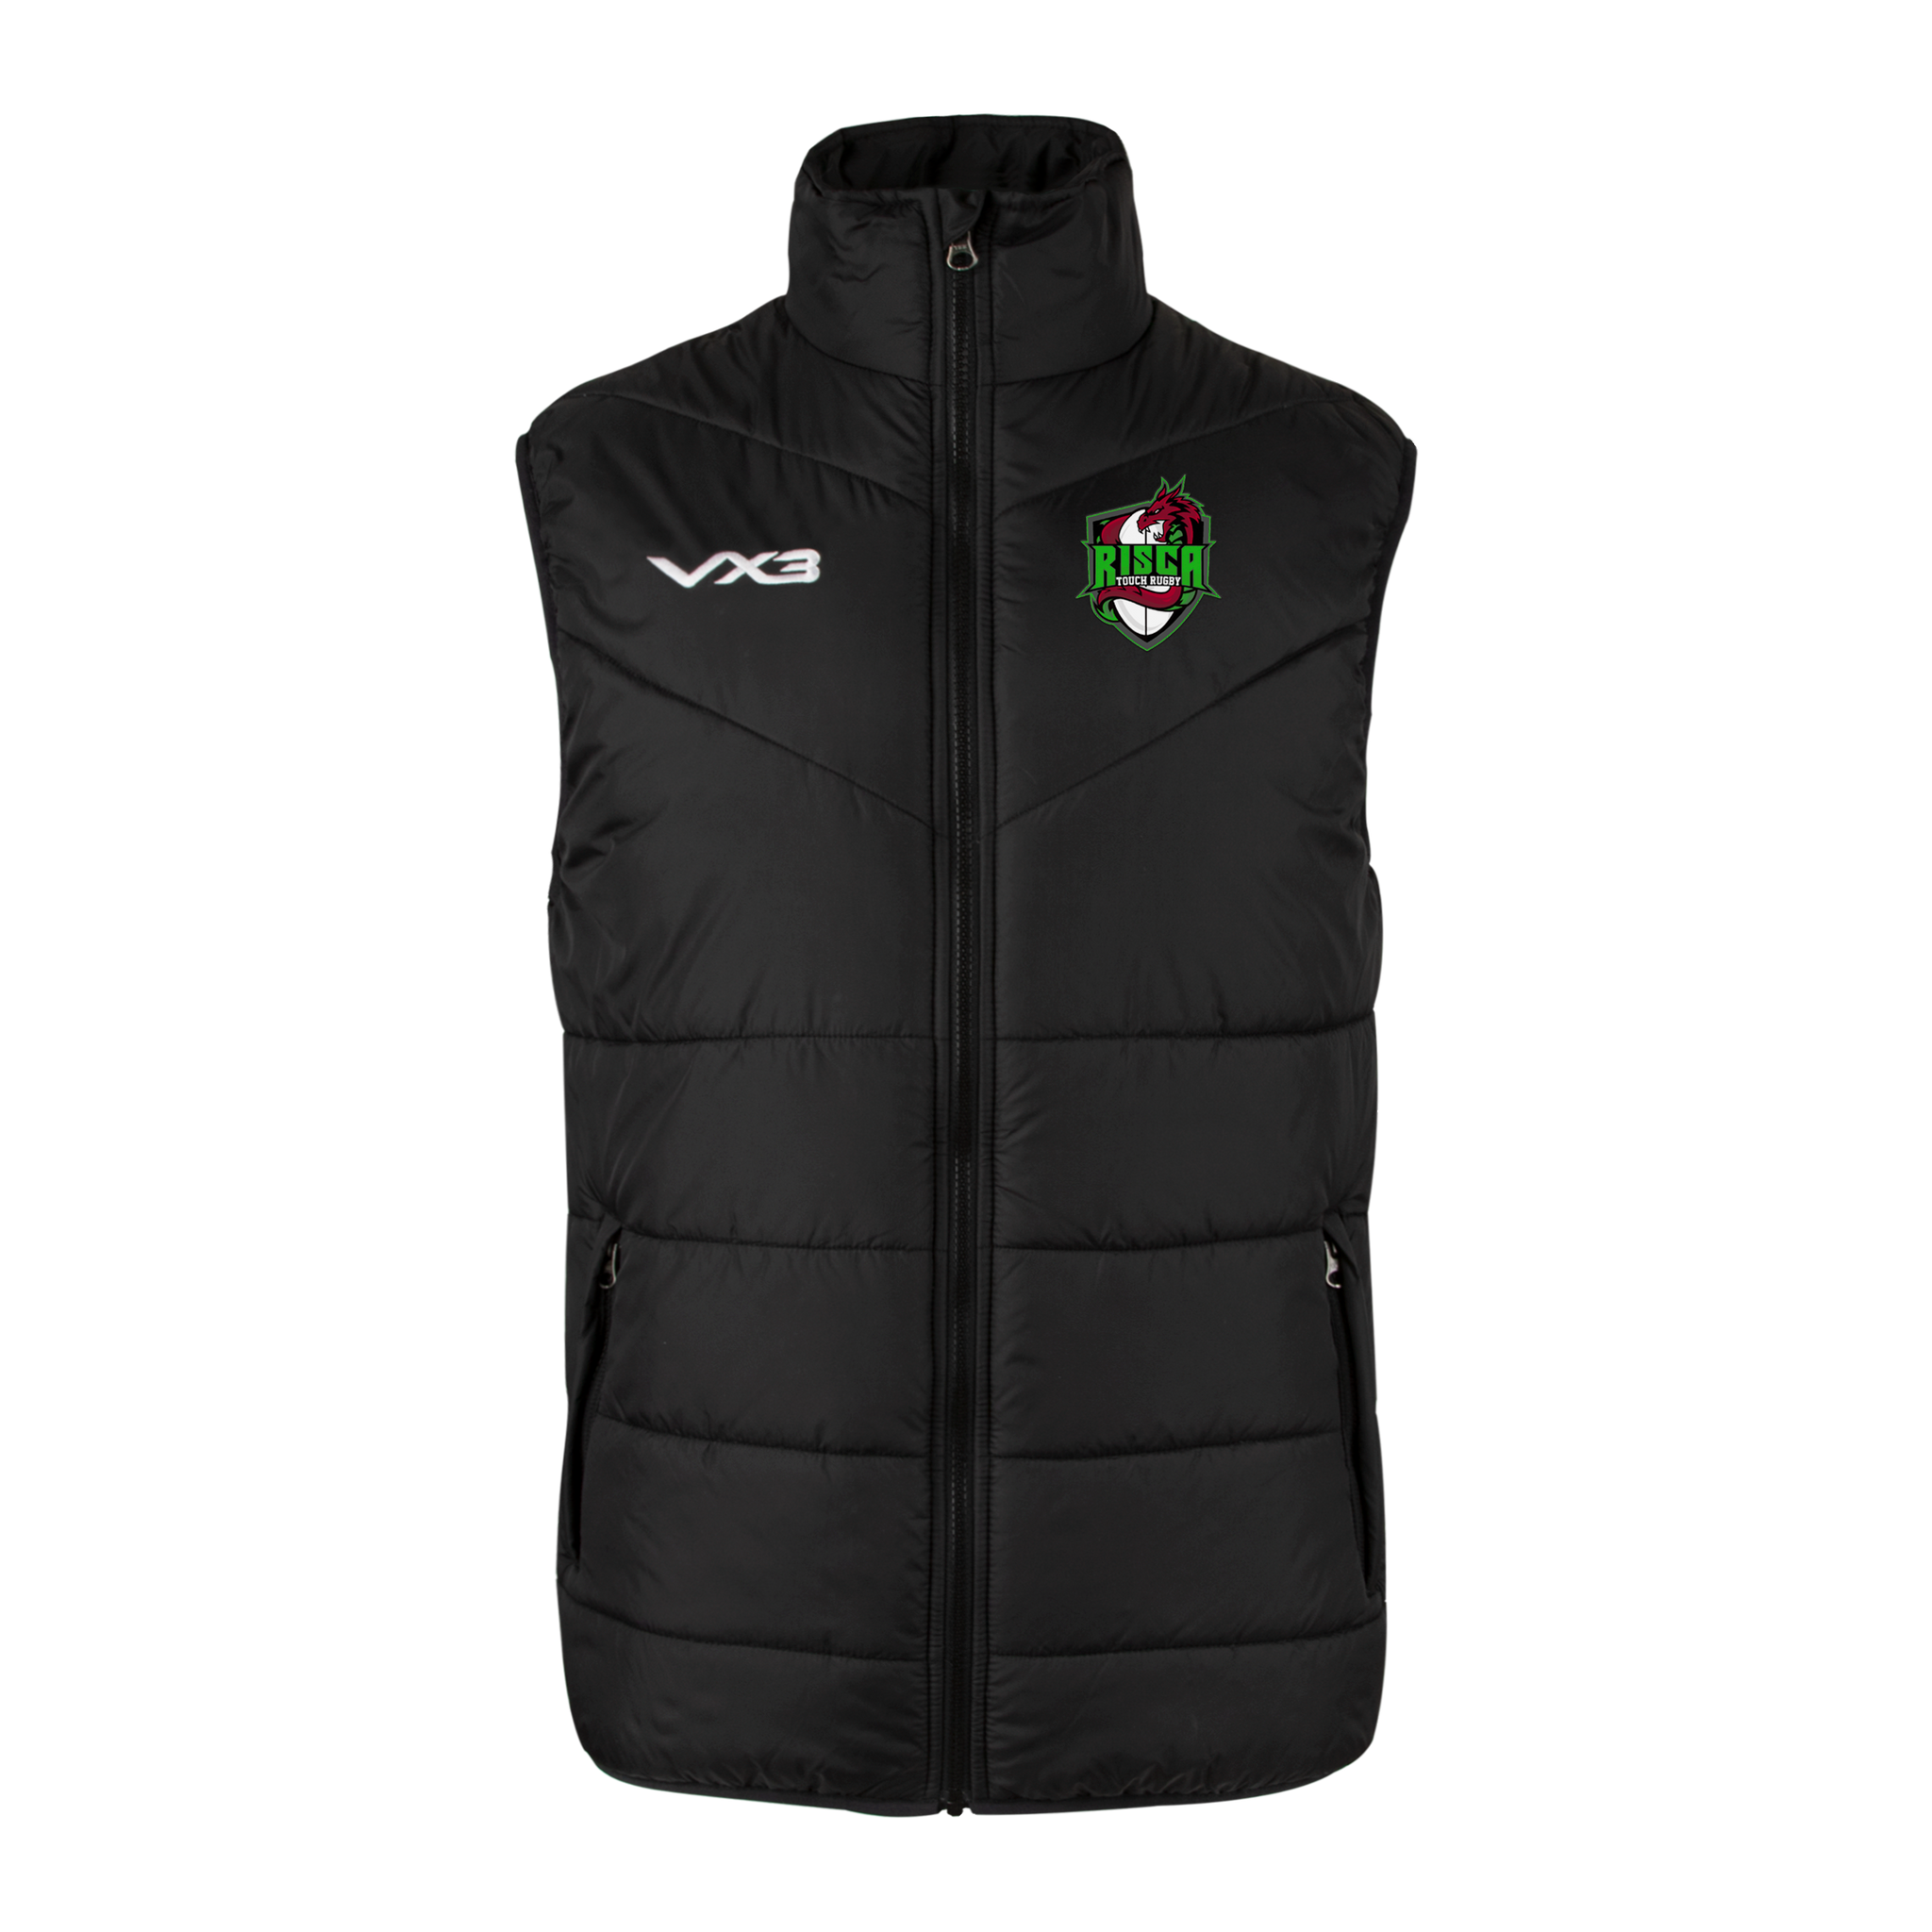 Risca Touch Rugby Ventus Gilet